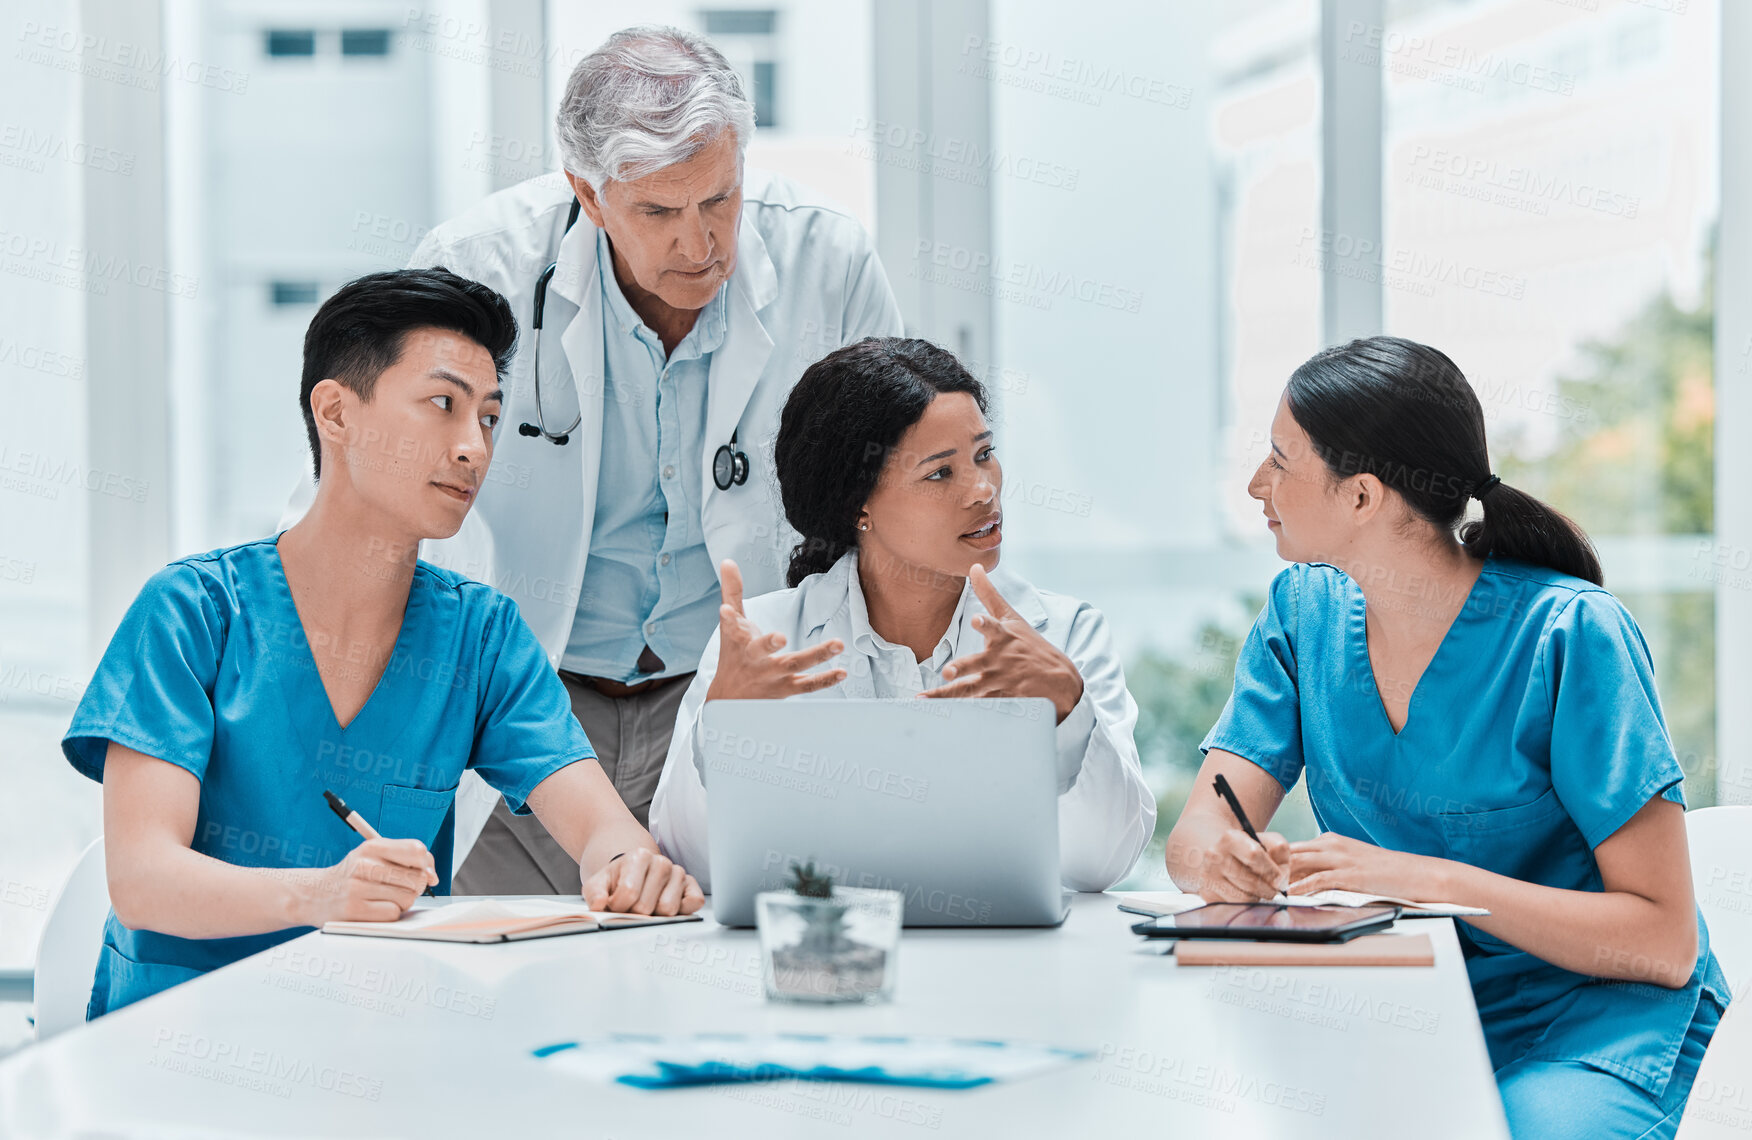 Buy stock photo Shot of a group of medical practitioners working together on a laptop in a medical office